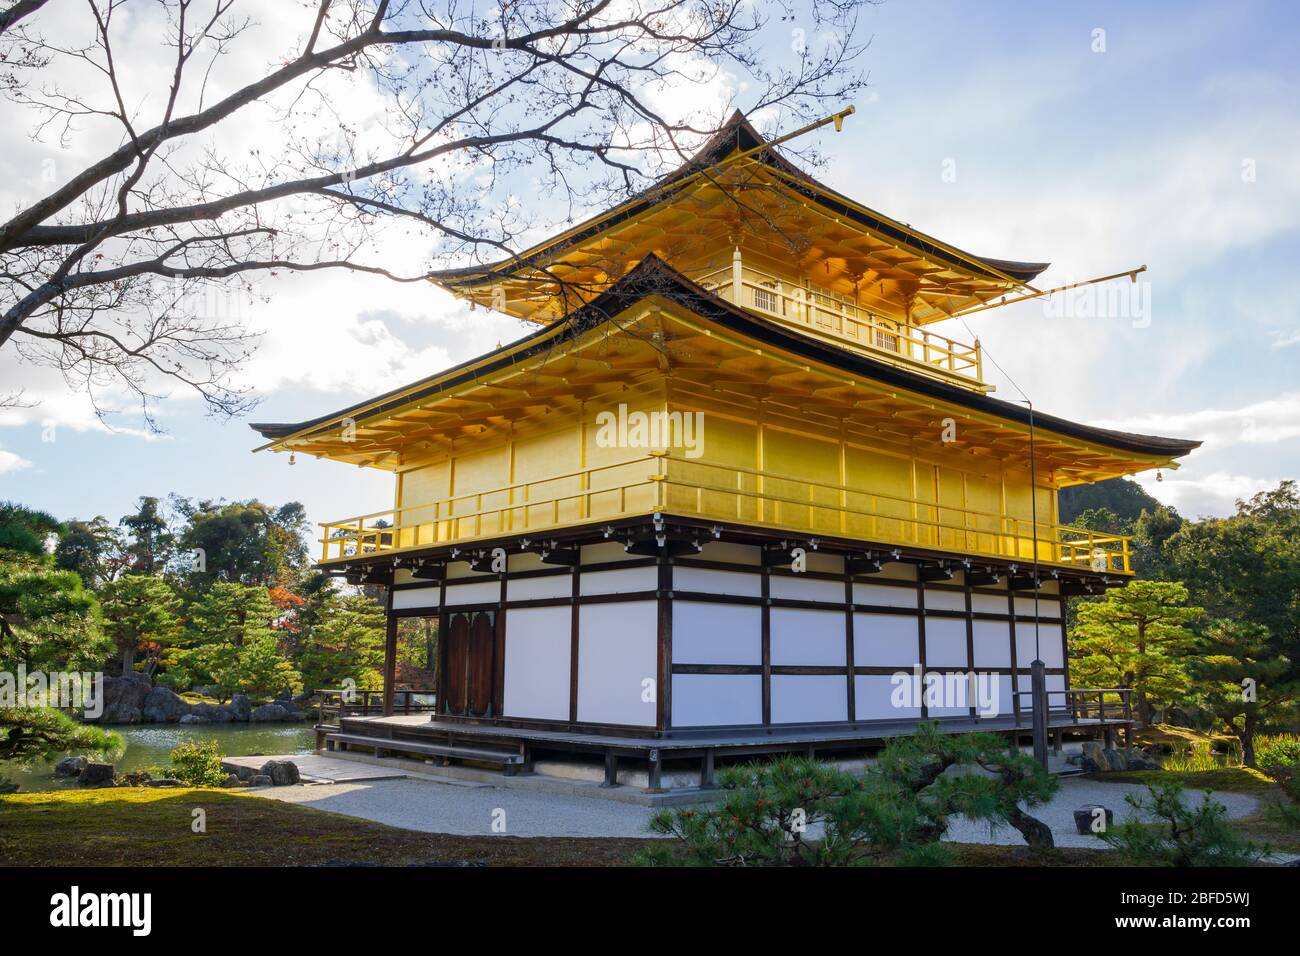 Kinkakuji Zen Buddhist Temple is an impressive structure built overlooking a large pond, known as a retirement complex. Stock Photo